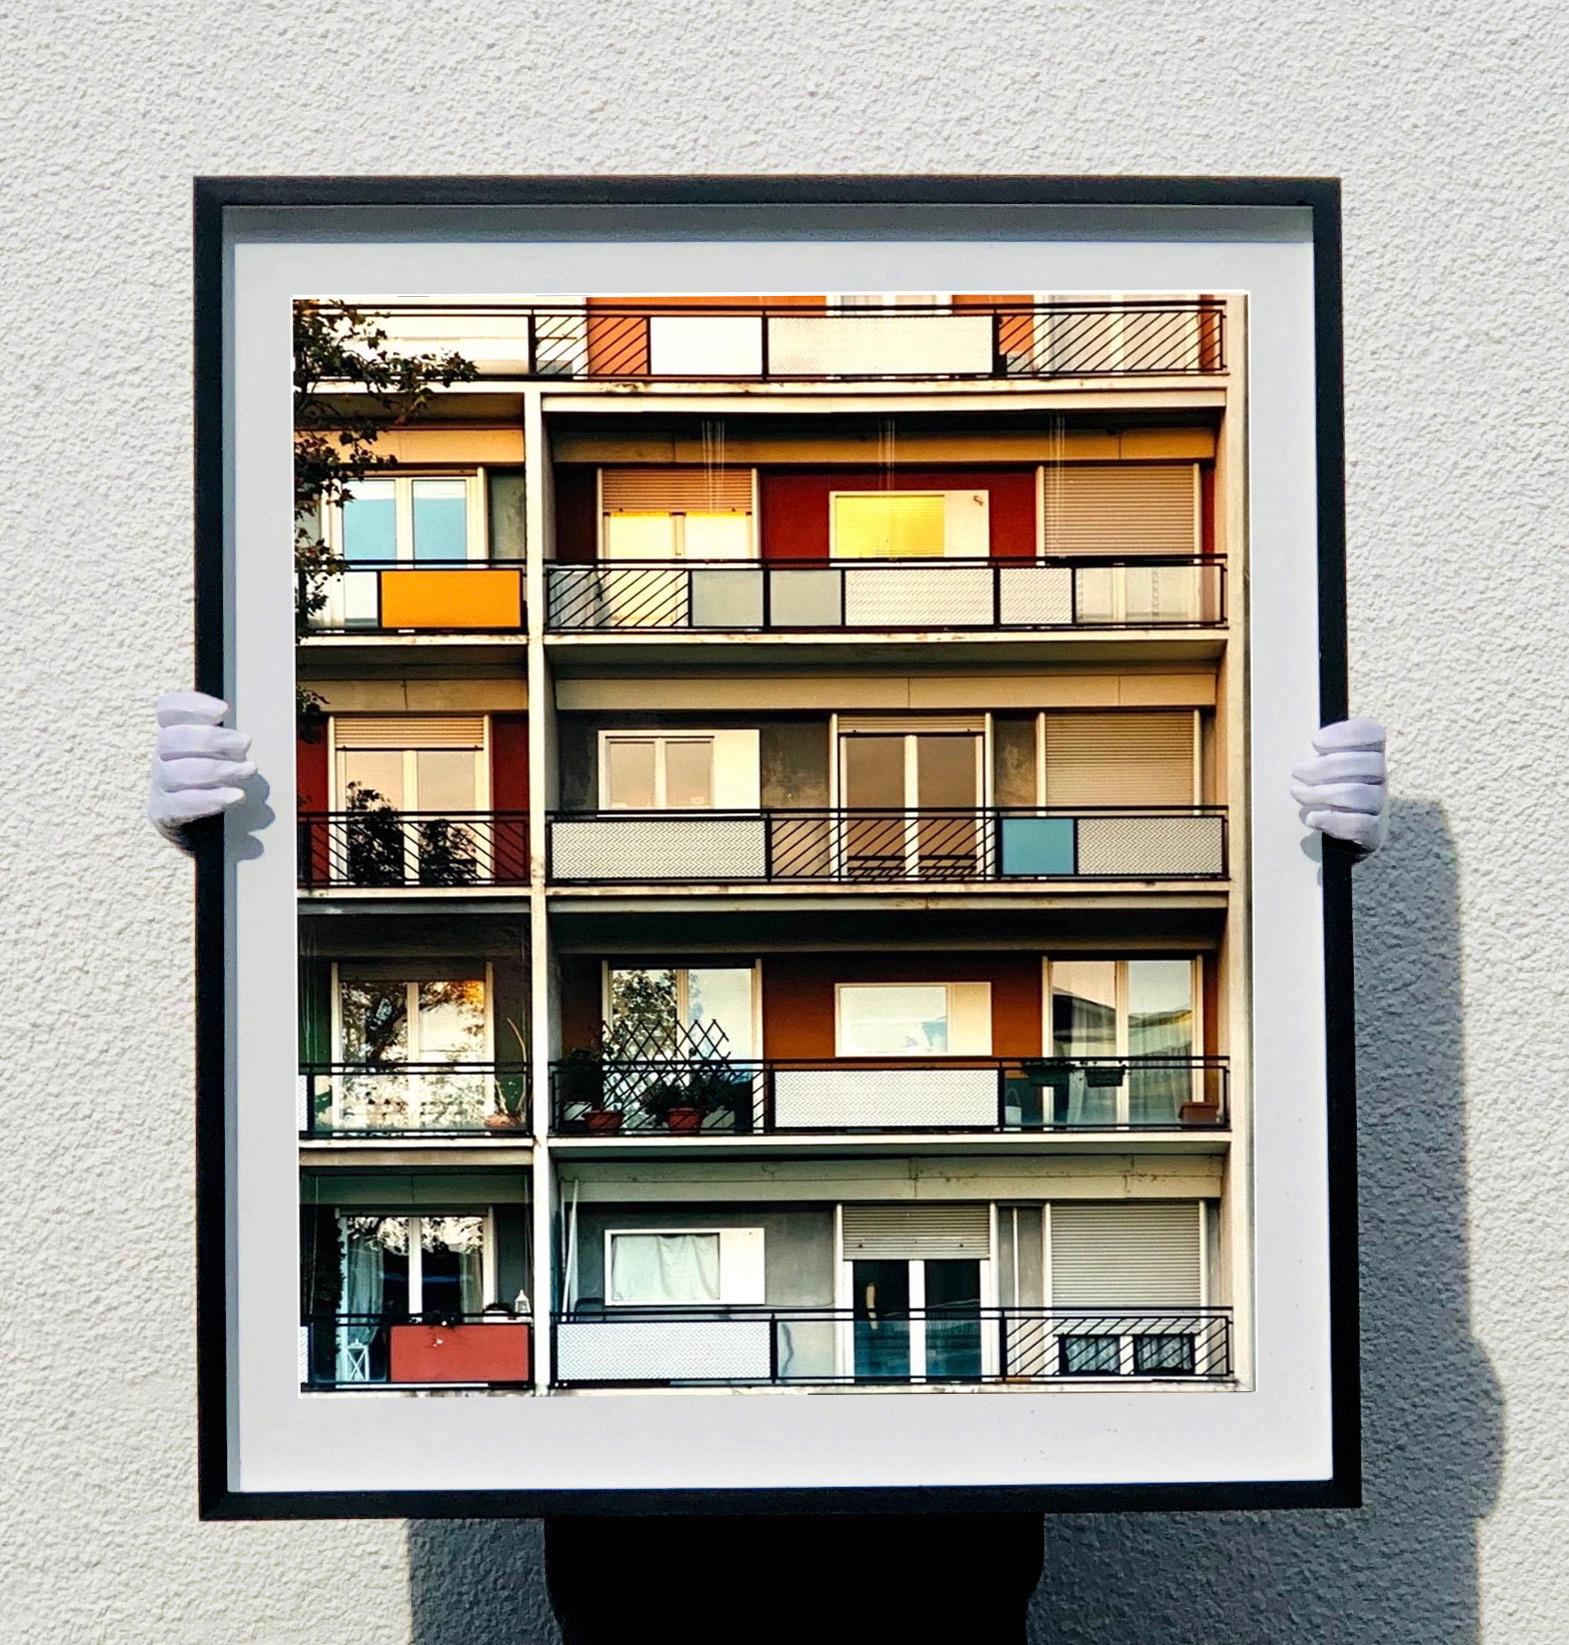 49 Via Dezza at Sunset, Milan - Conceptual Architectural Color Photography For Sale 1